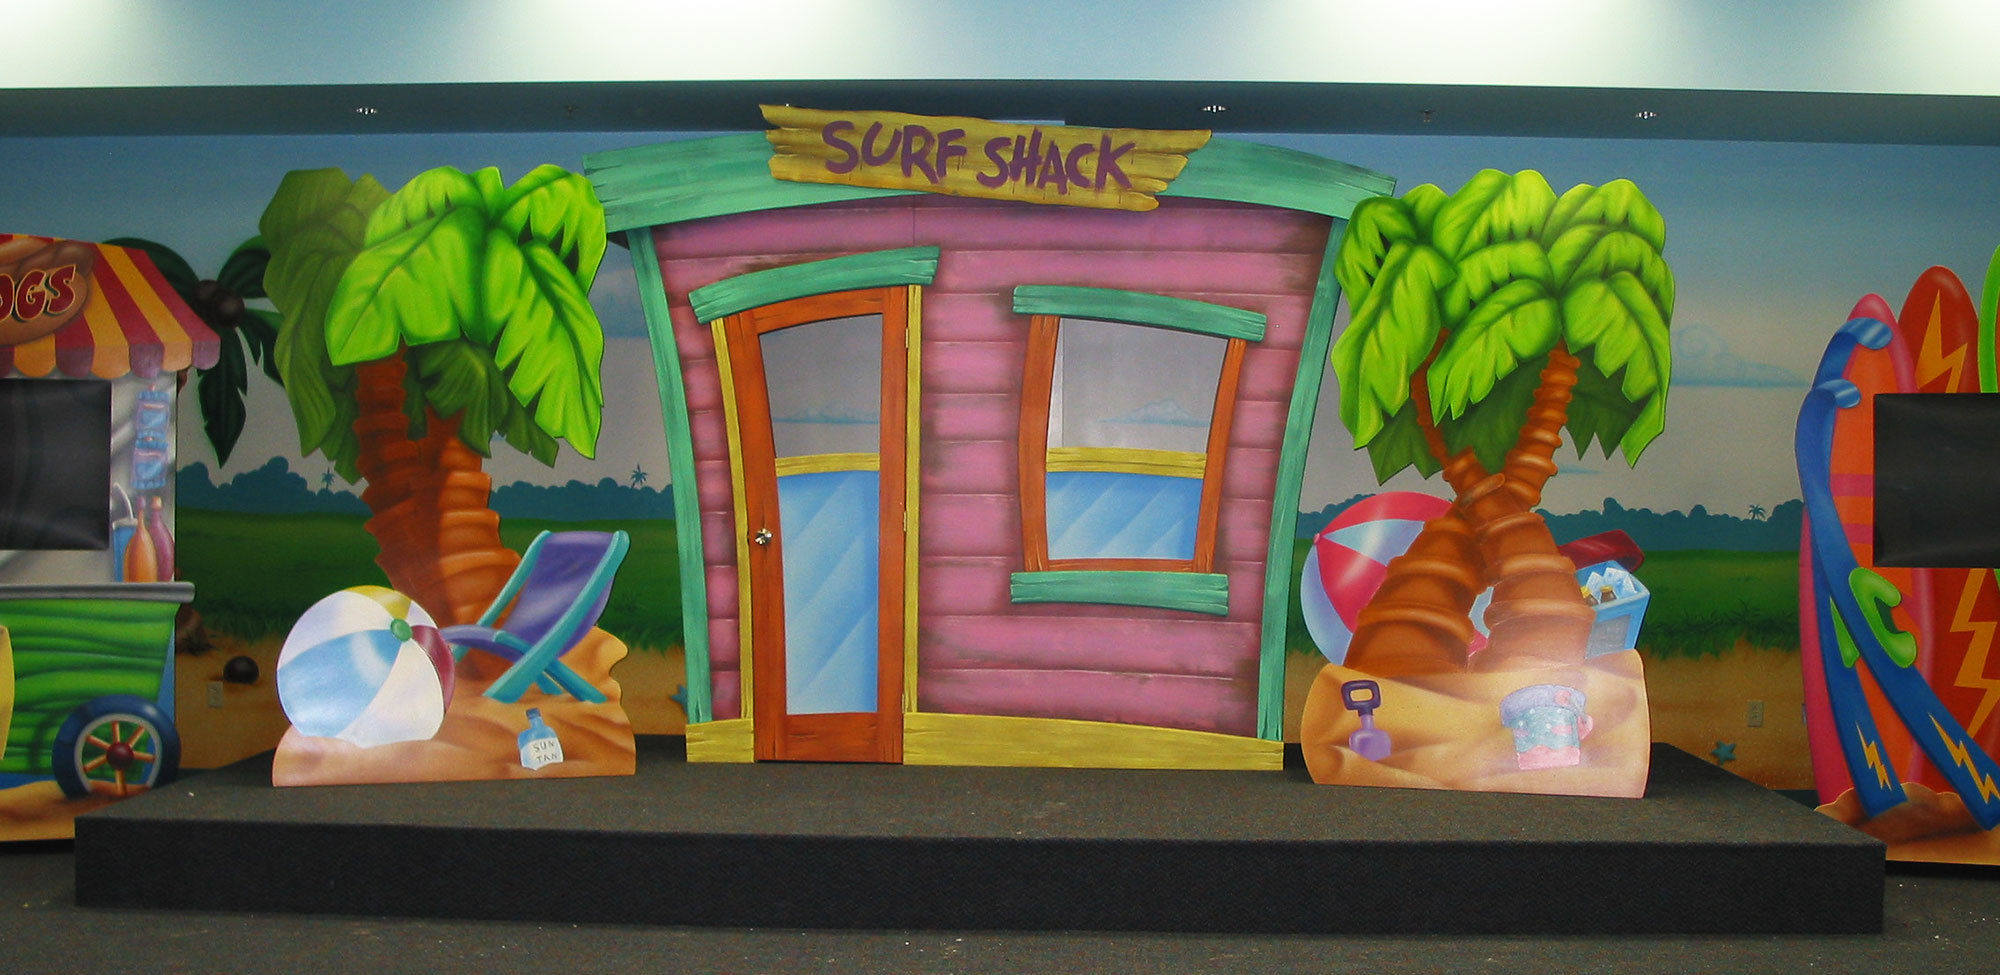 Beach Themed Stage with 2D Surf shack, palm trees, beach balls and chairs.